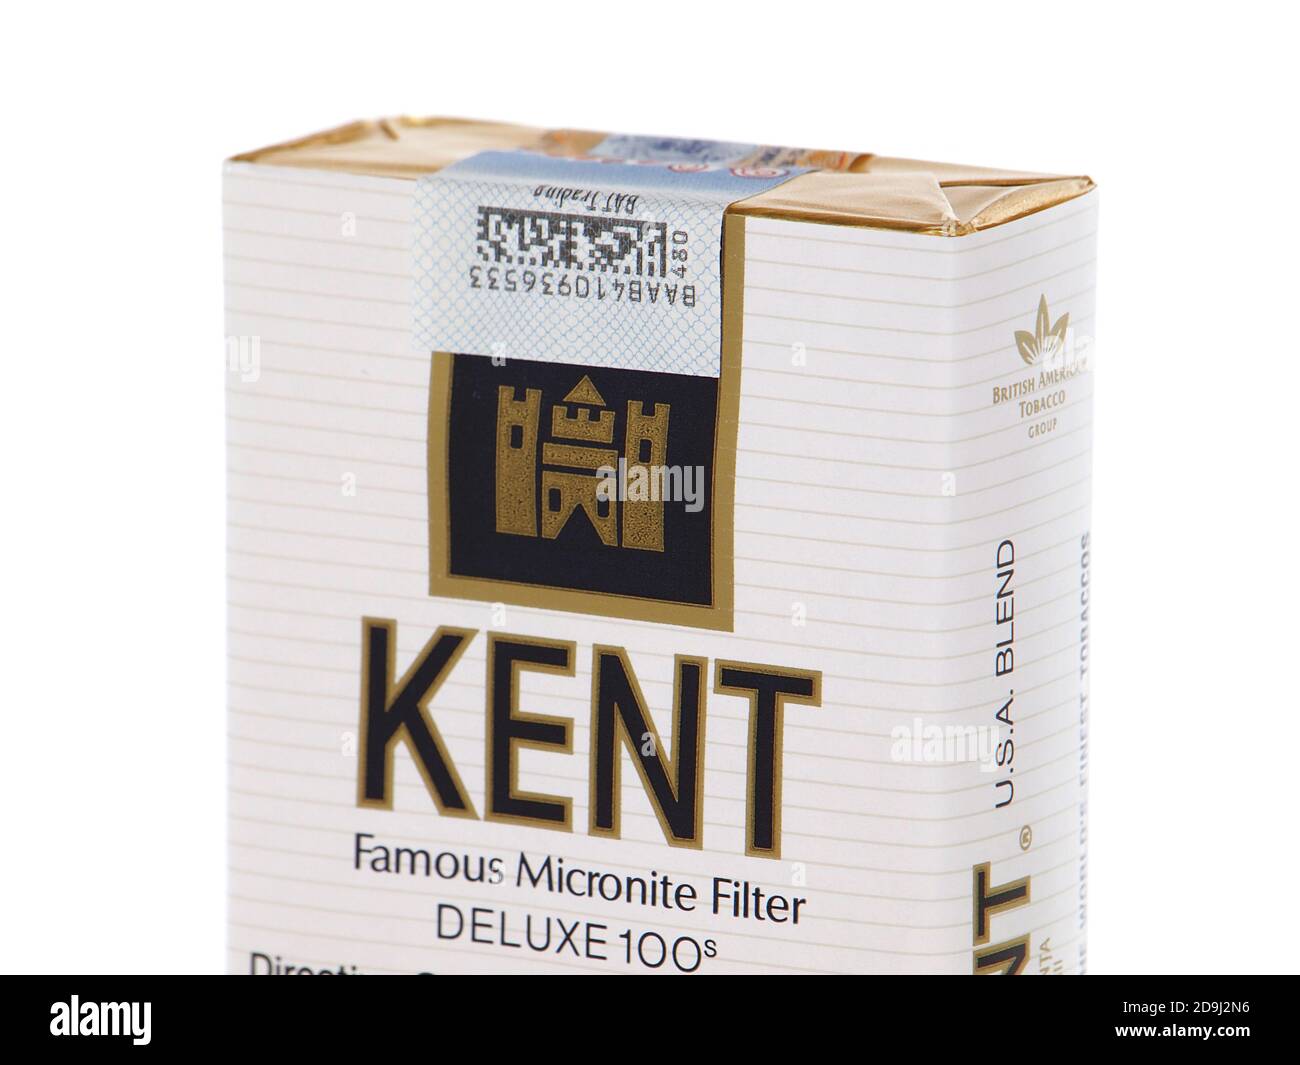 BUCHAREST, ROMANIA - NOVEMBER 1, 2015. Pack of Kent Cigarettes, made by R.J. Reynolds Tobacco Company Stock Photo